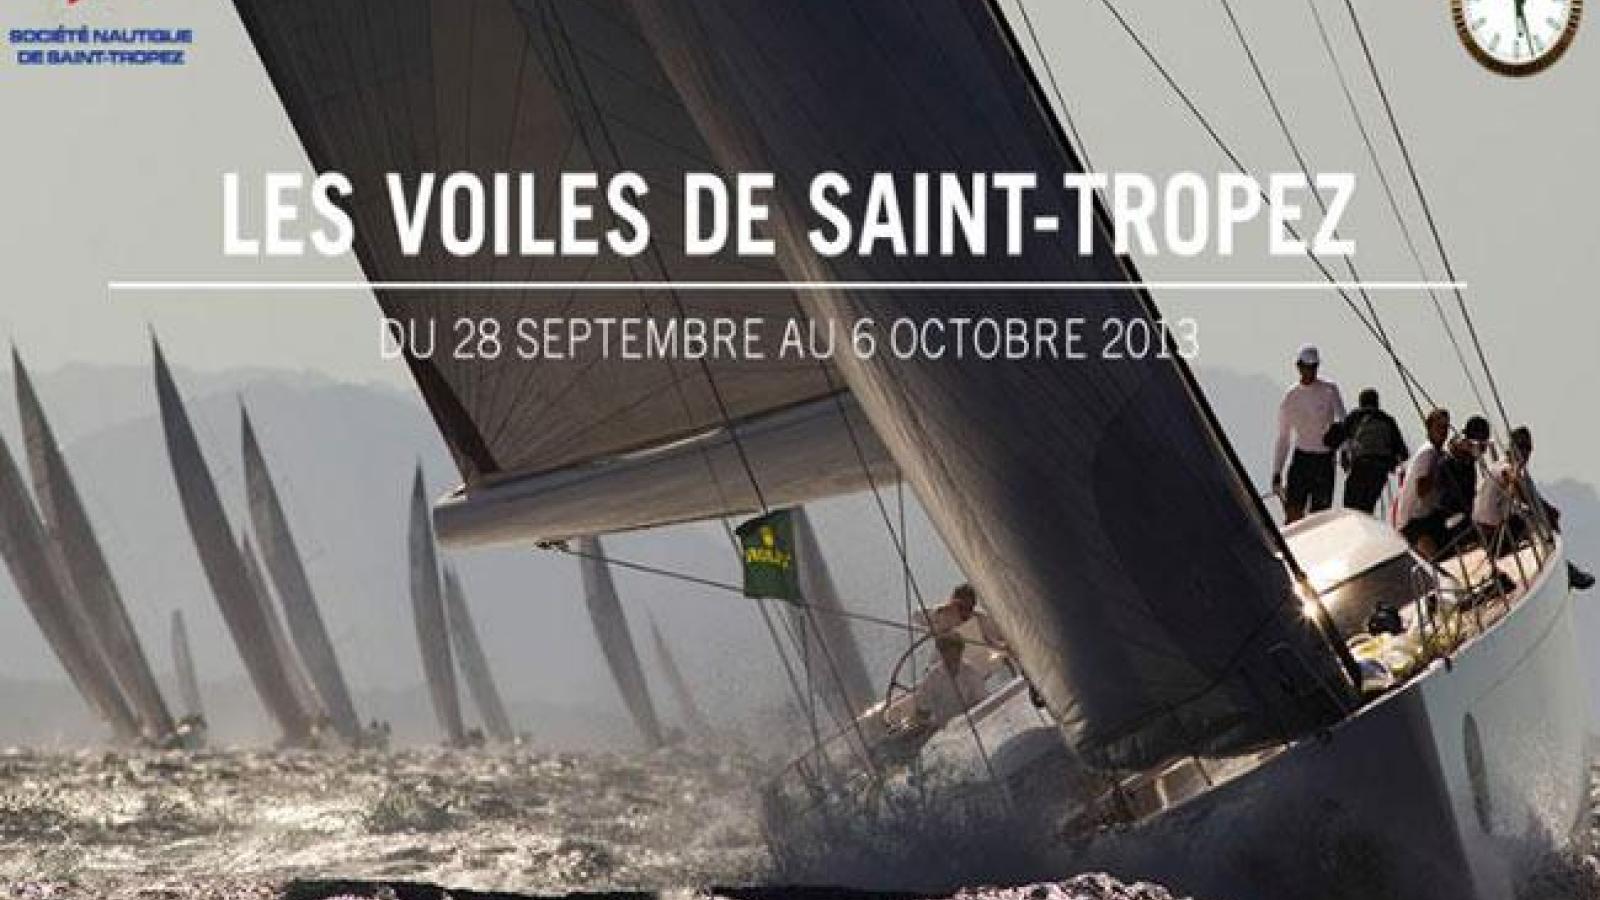 Les Voiles de St-Tropez and the special offer of the Sezz Hotel